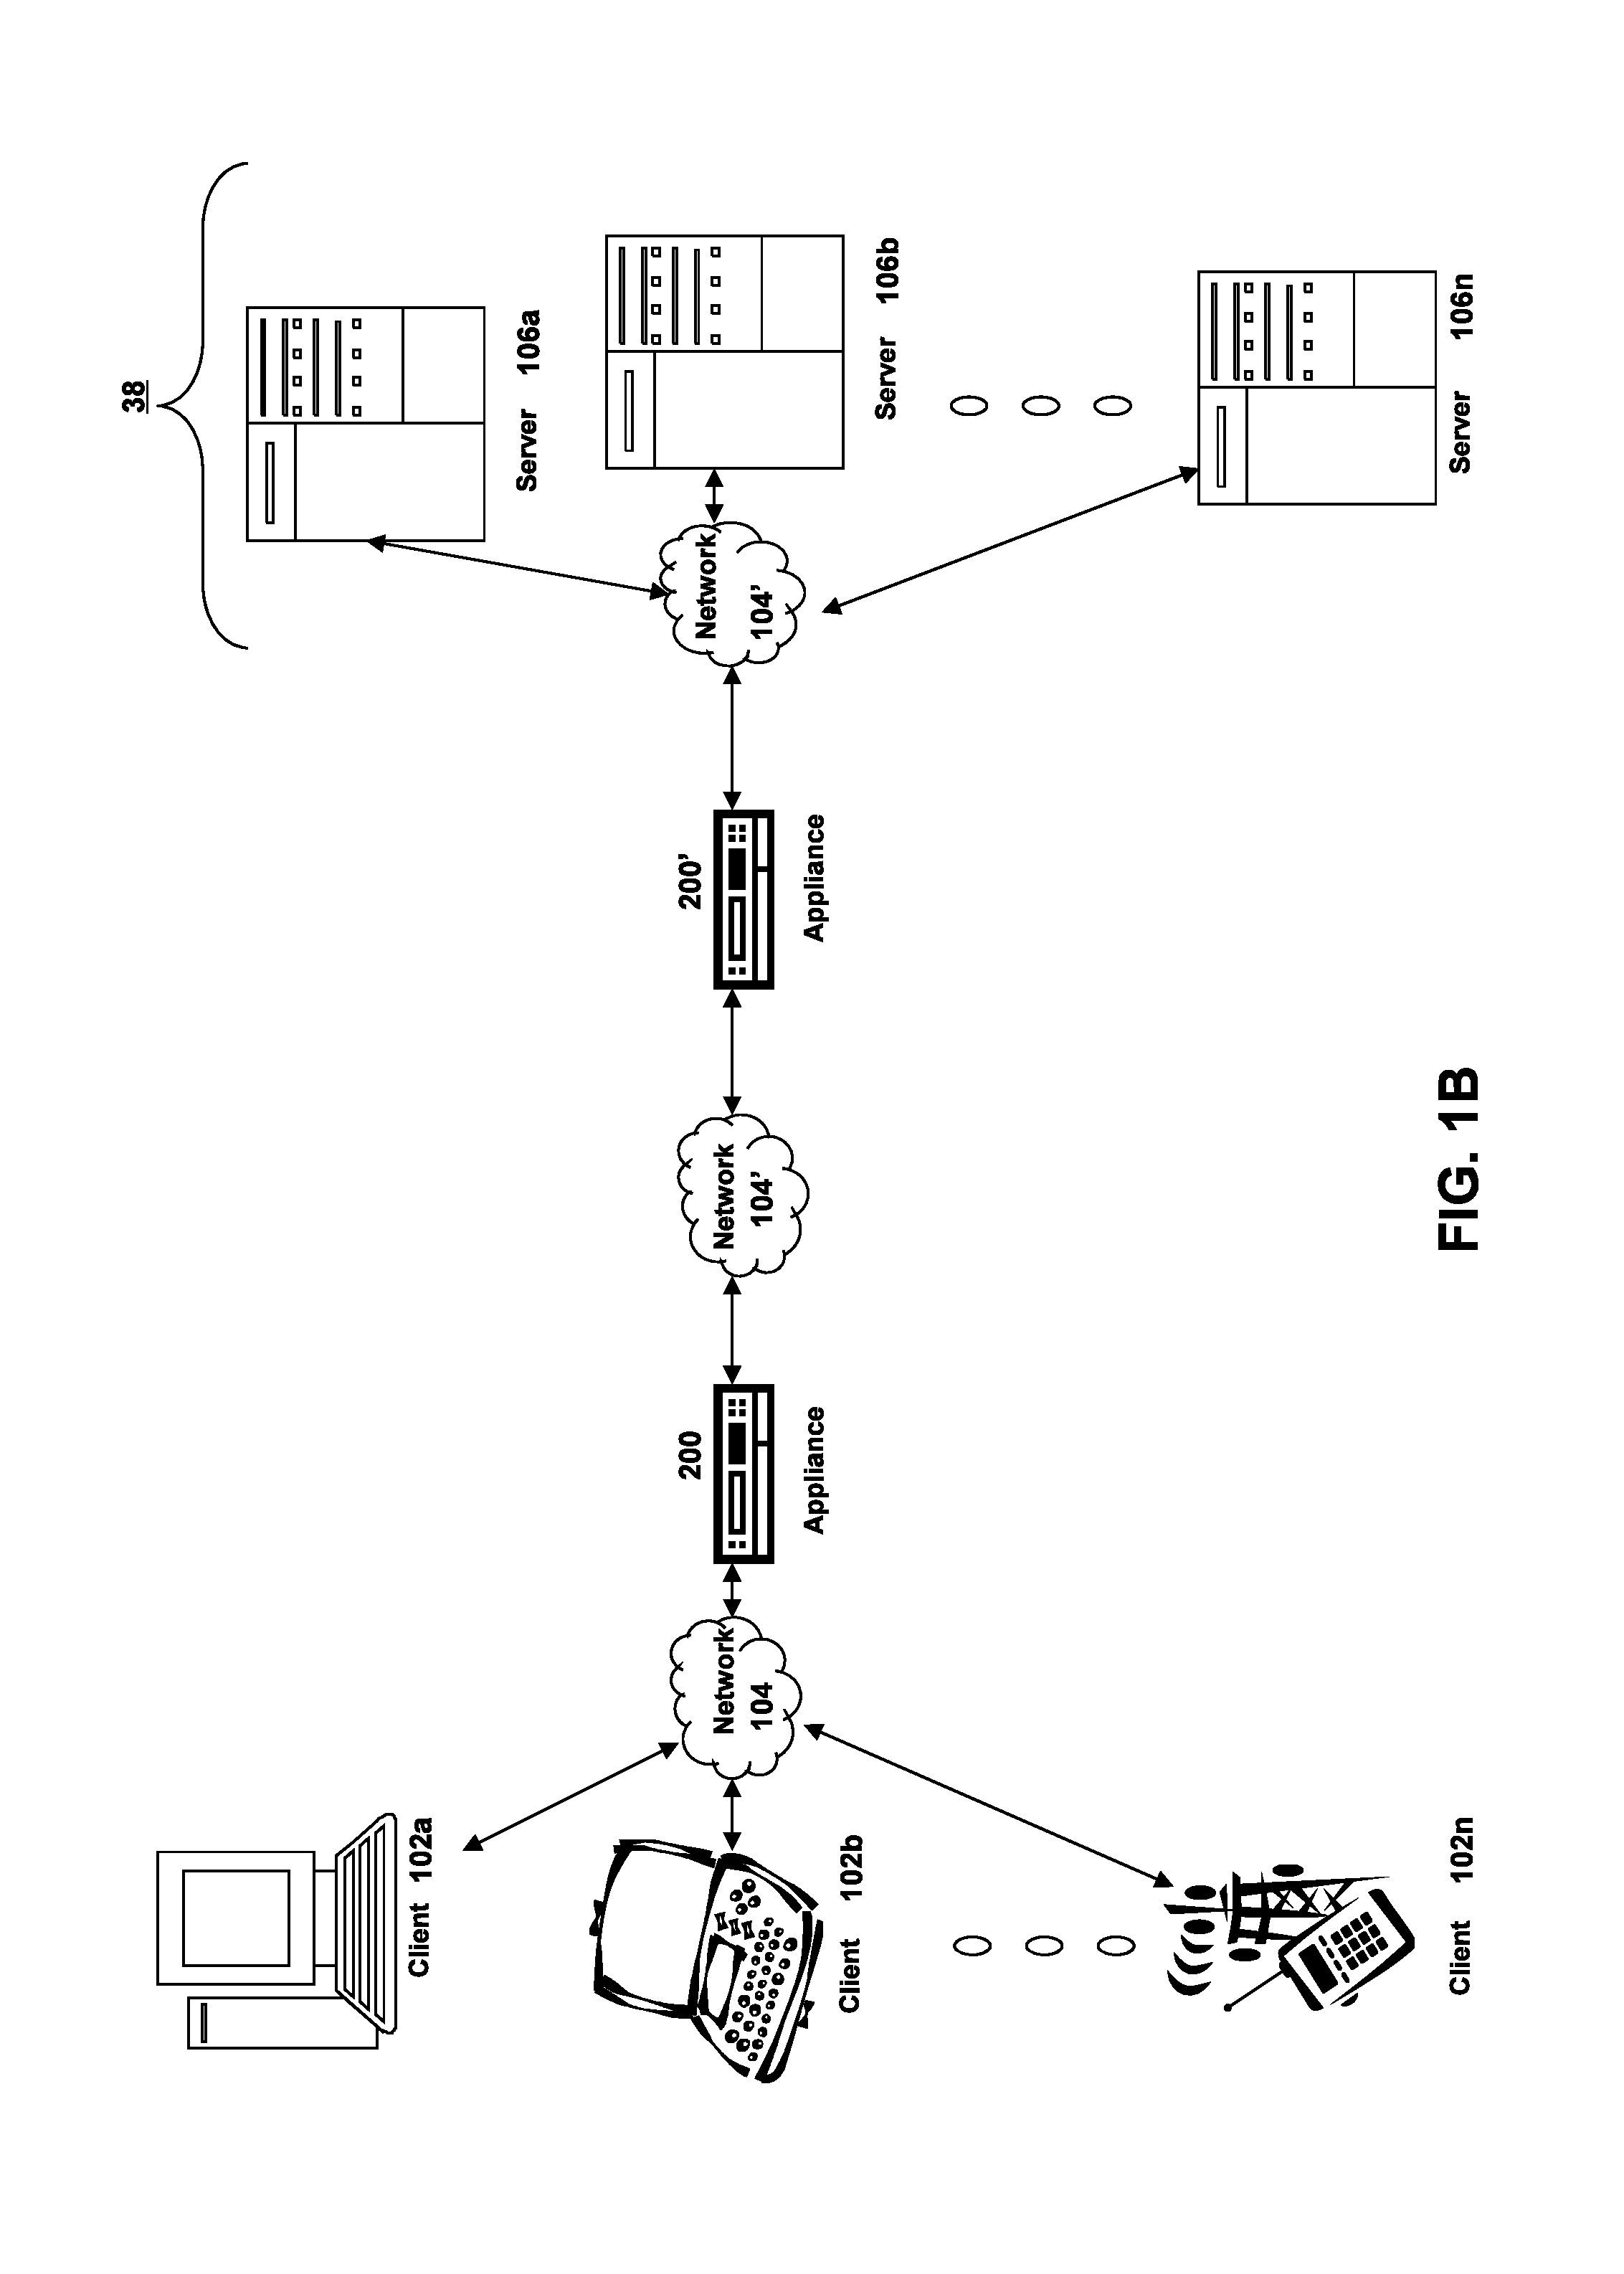 Systems and methods for flexible, extensible authentication subsystem that enabled enhance security for applications